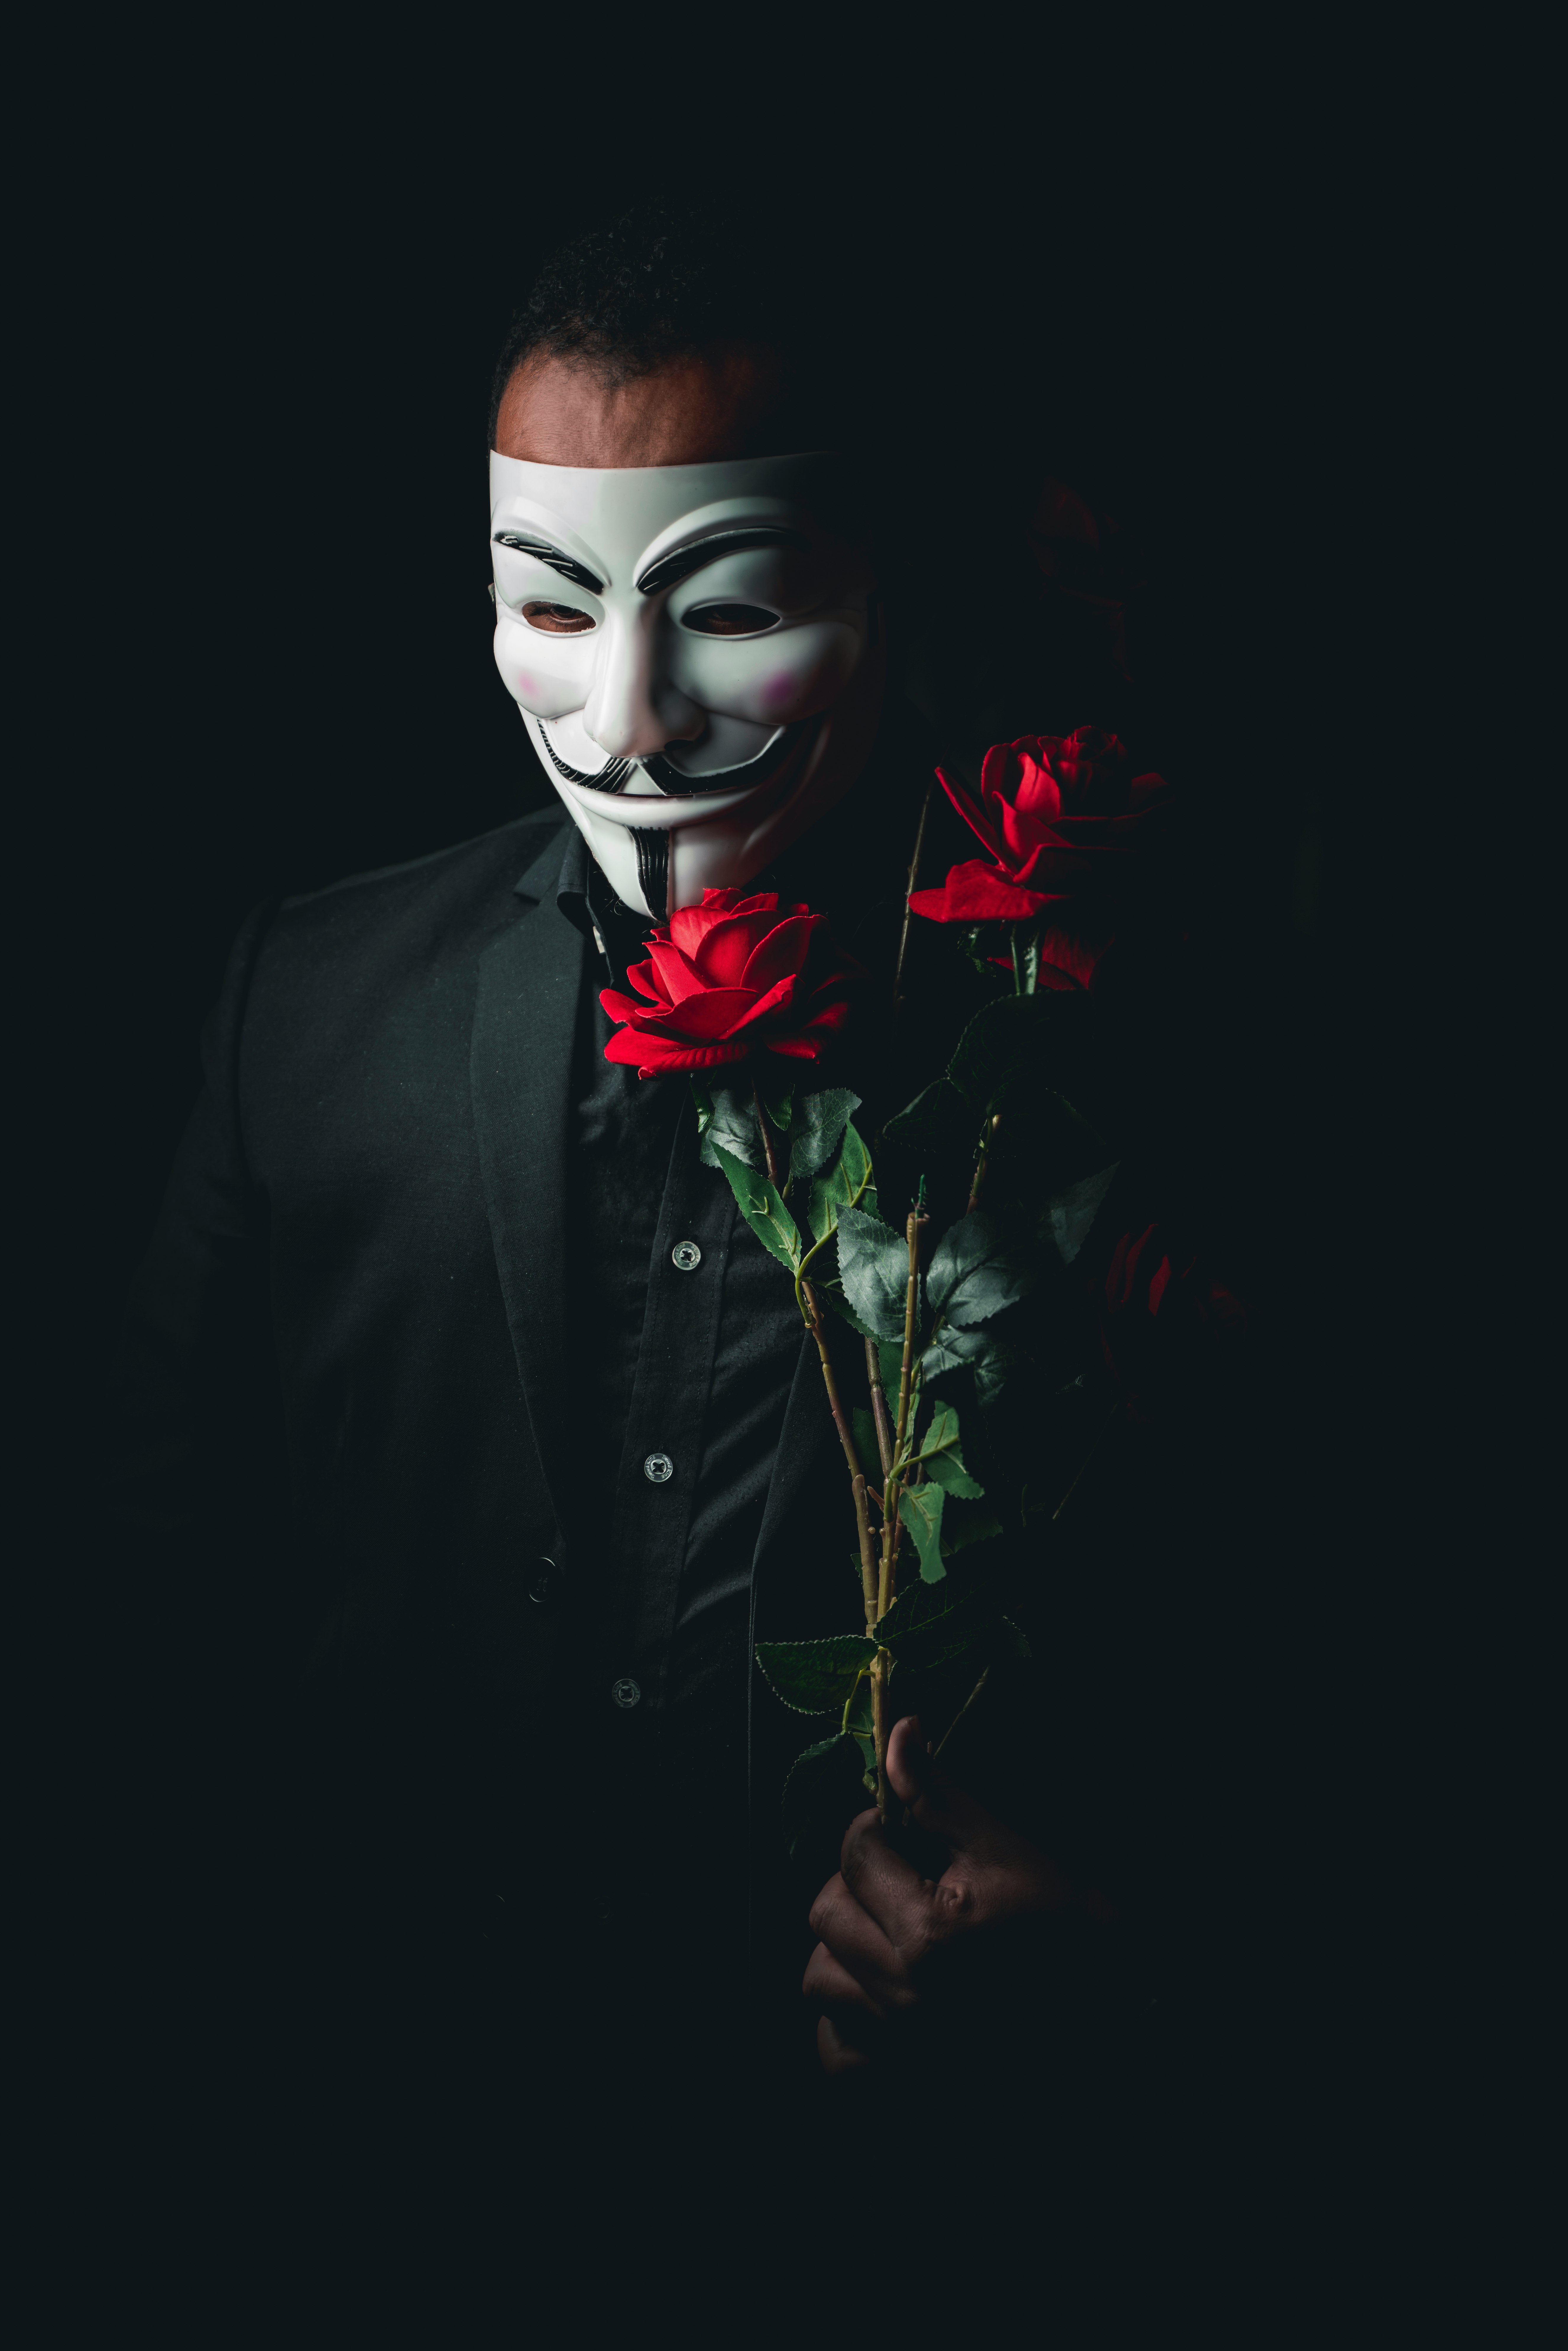 person in black suit with red rose on face